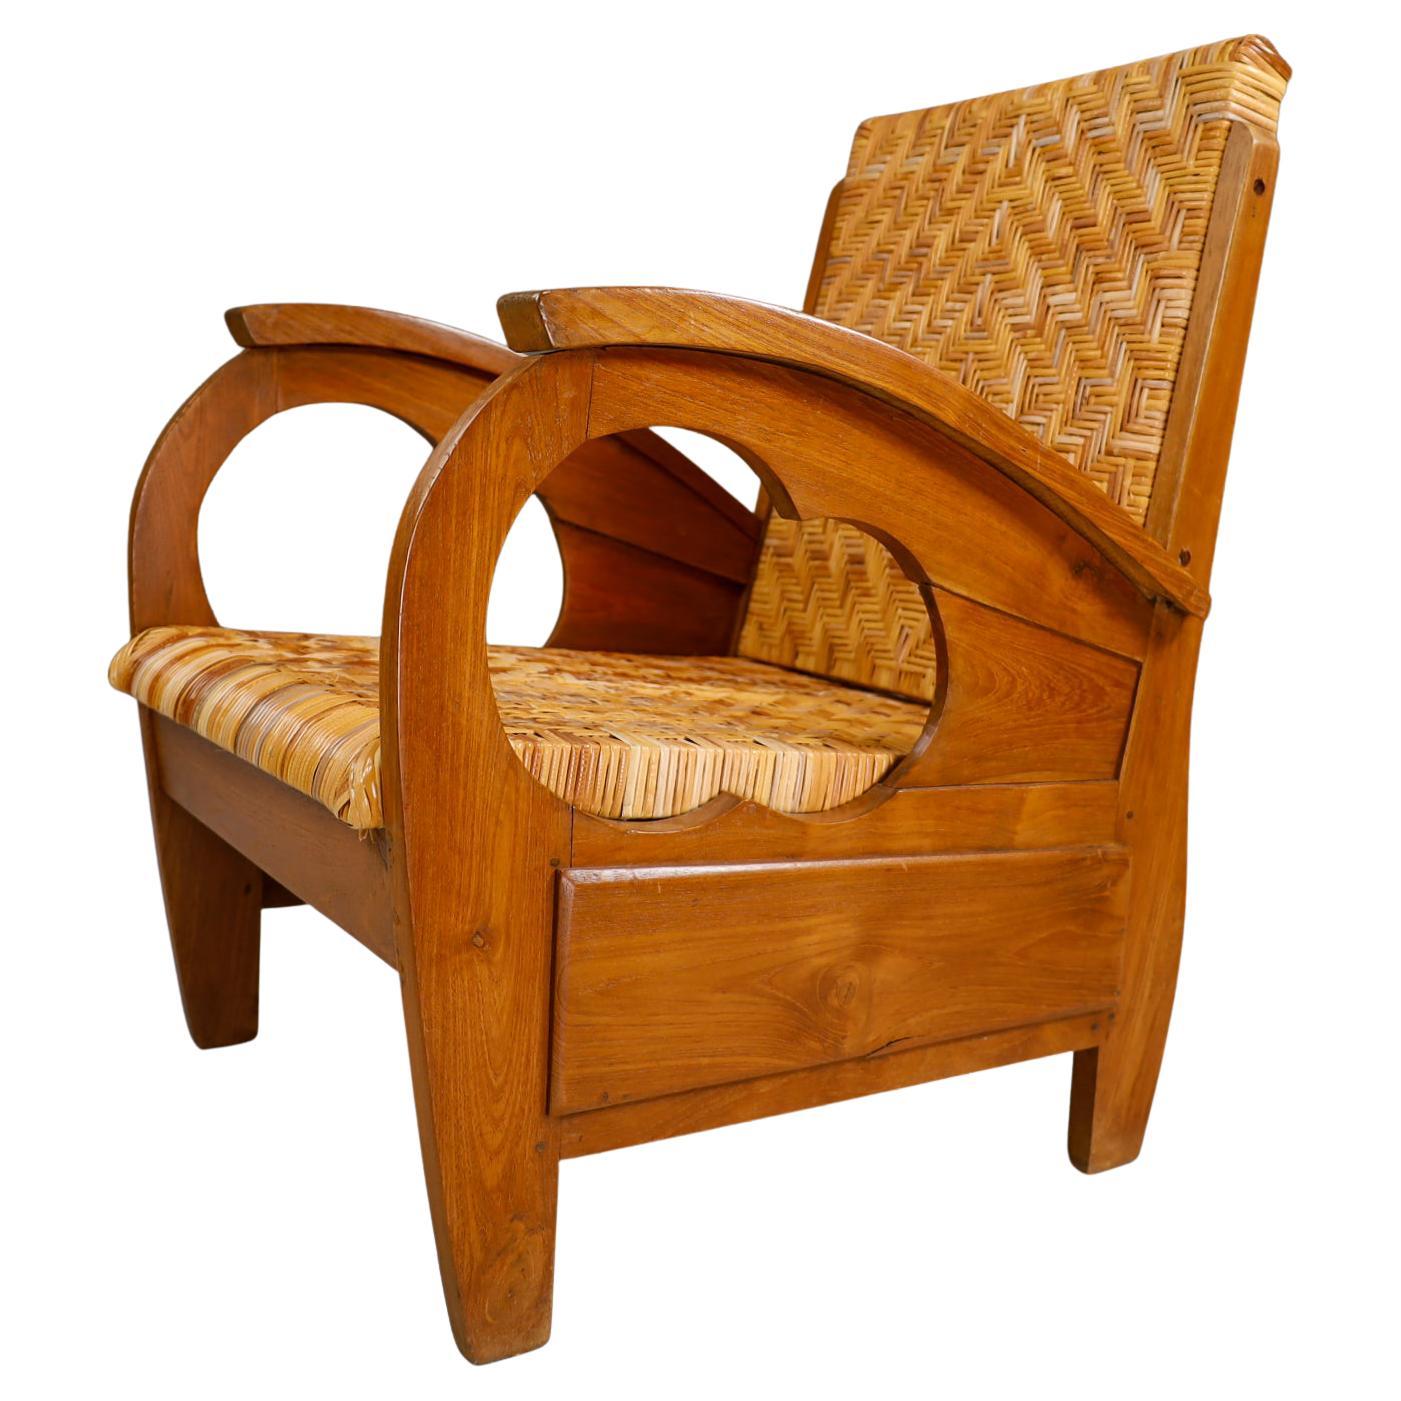 British Colonial Rattan and Wood Art Deco Arm Chair, India, 1920s For Sale